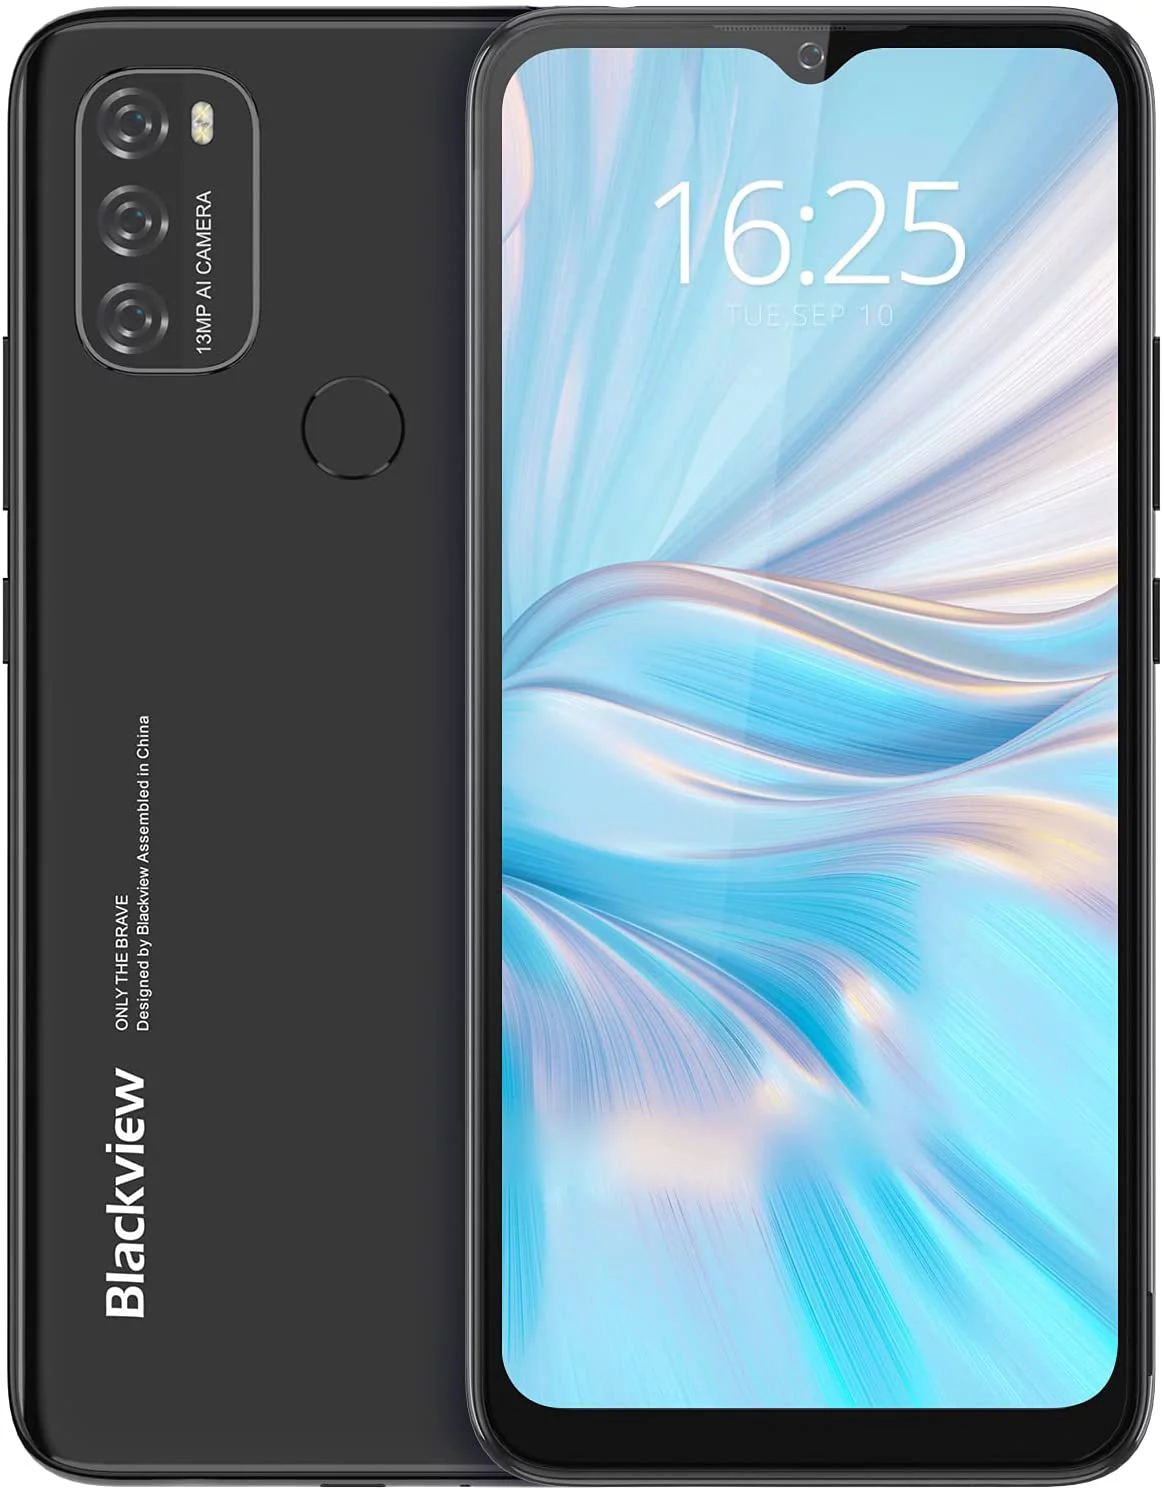 Blackview A70 Price, Review, Specifications and Video